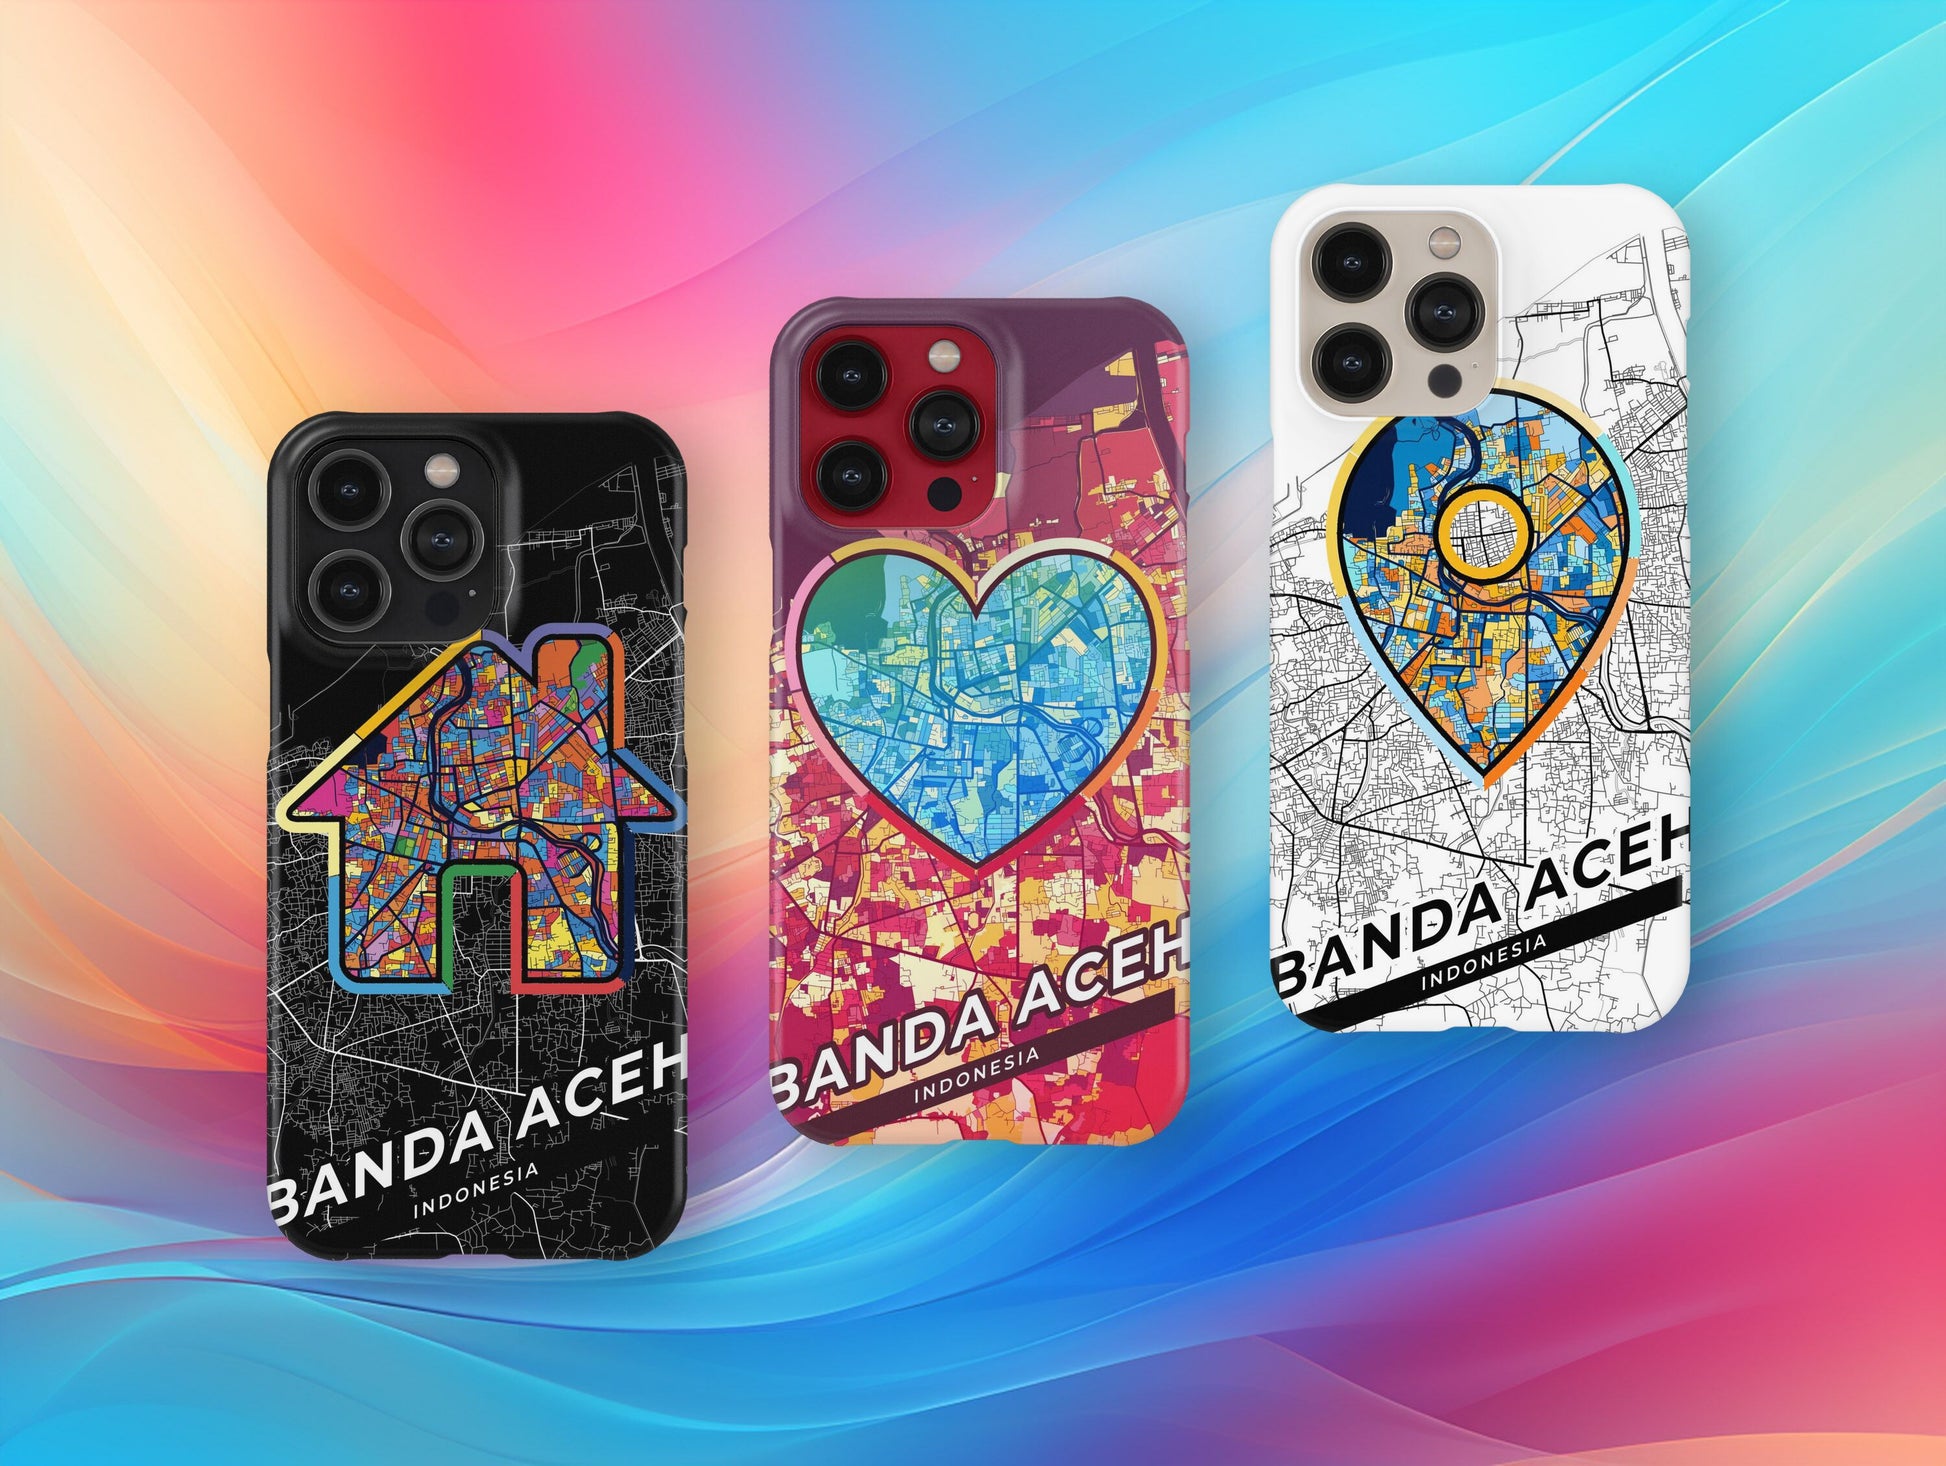 Banda Aceh Indonesia slim phone case with colorful icon. Birthday, wedding or housewarming gift. Couple match cases.